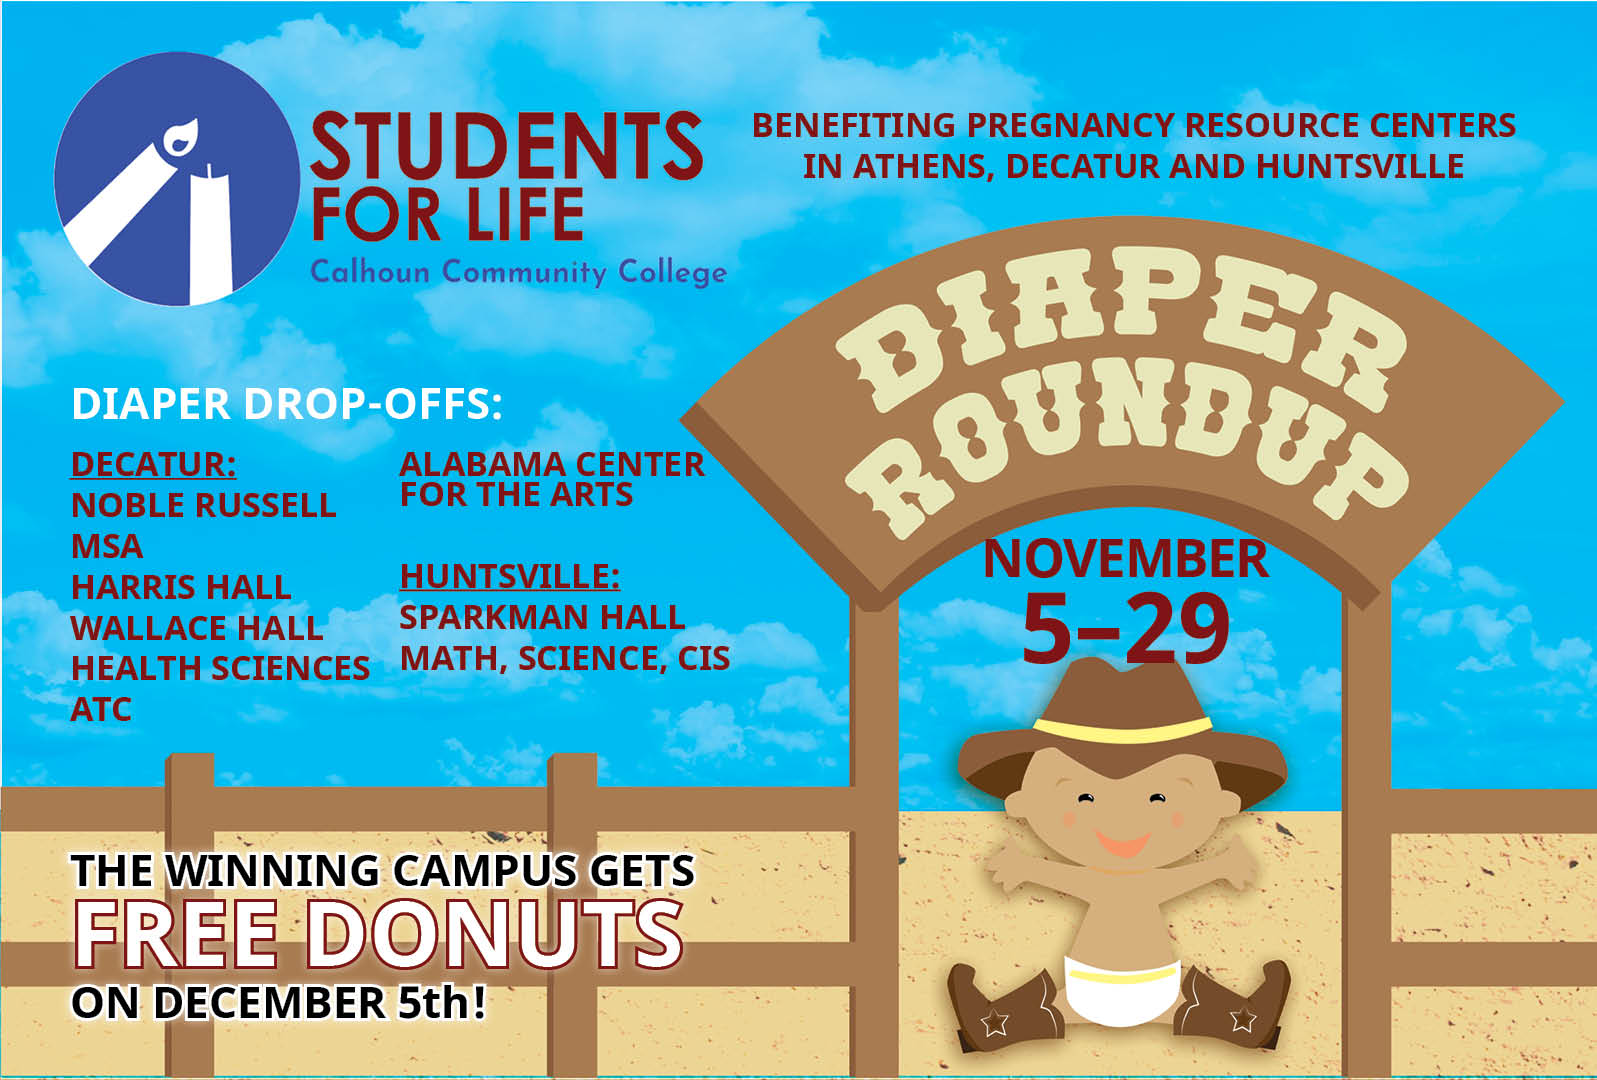 Diaper Roundup - Students for Life Calhoun Community College - Benefiting pregnancy resource centers in Athens, Decatur and Huntsville. Driaper Drop-offs: Decatur - Noble Russell, MSA, Harris Hall, Wallace Hall, Health Sciences, ATC, ACA - Huntsville - Sparkman Hall and Math, Science CIS - The winning campus gets FREE DONUTS on December 5th!